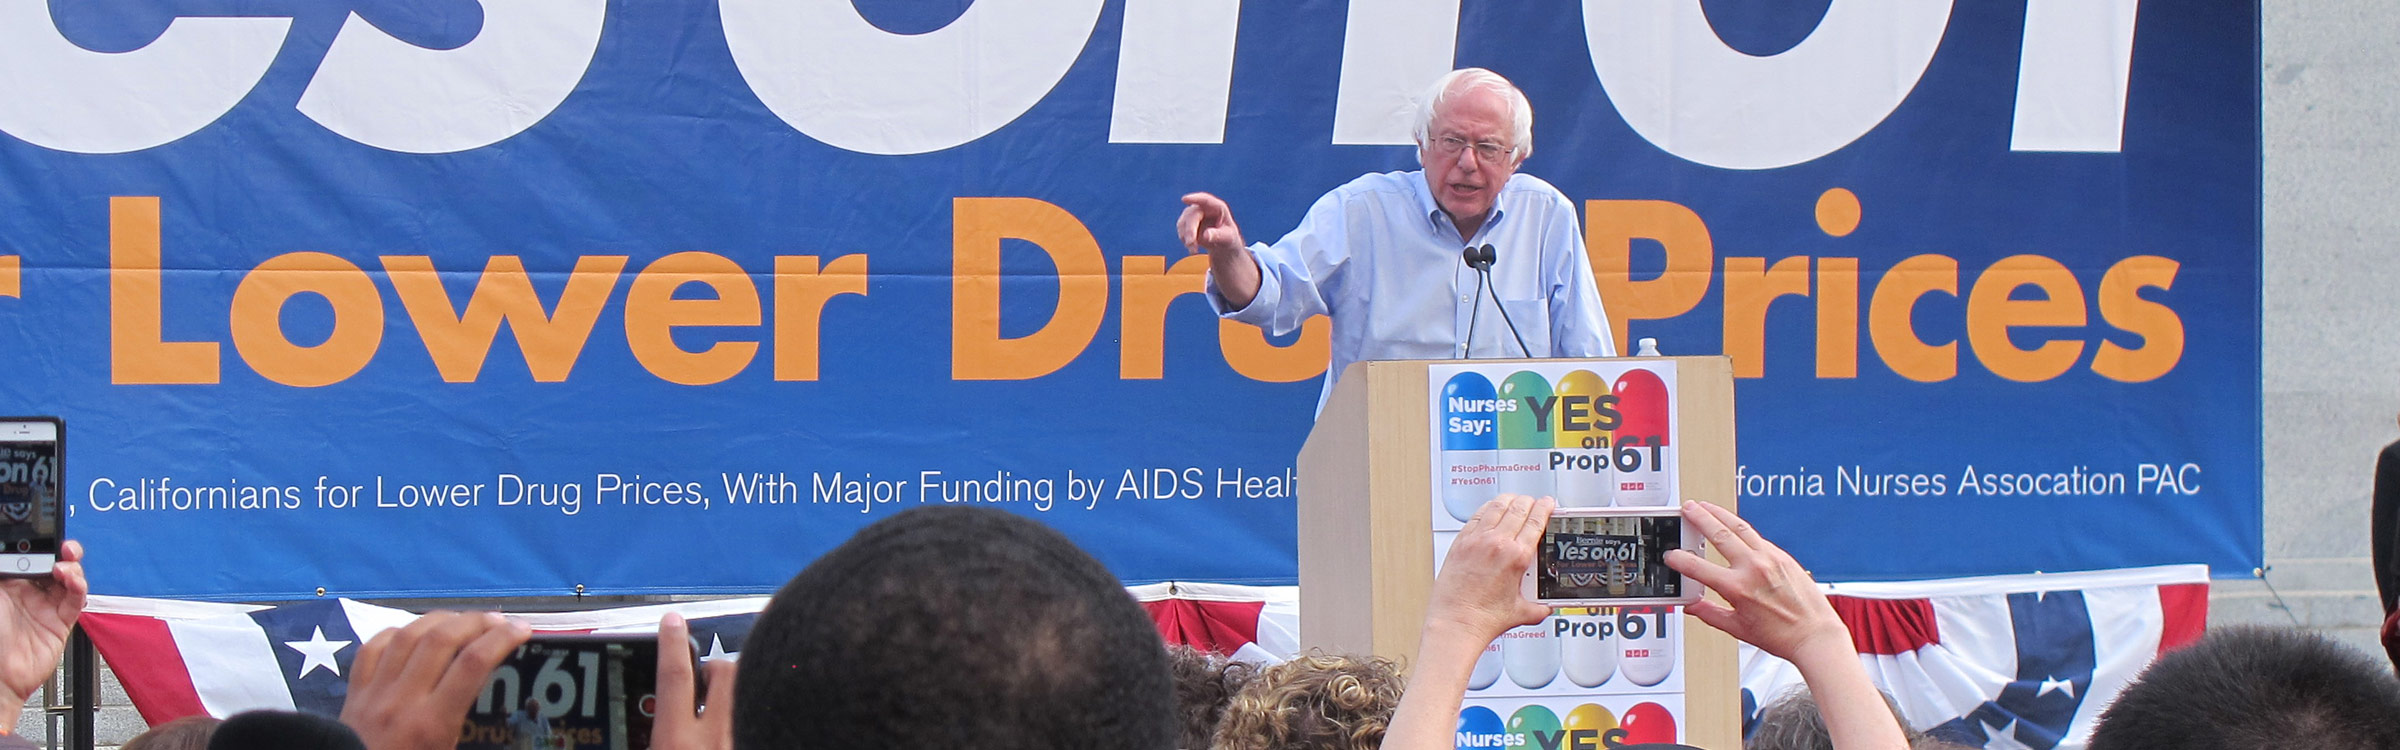 Sanders calls for lower drug prices